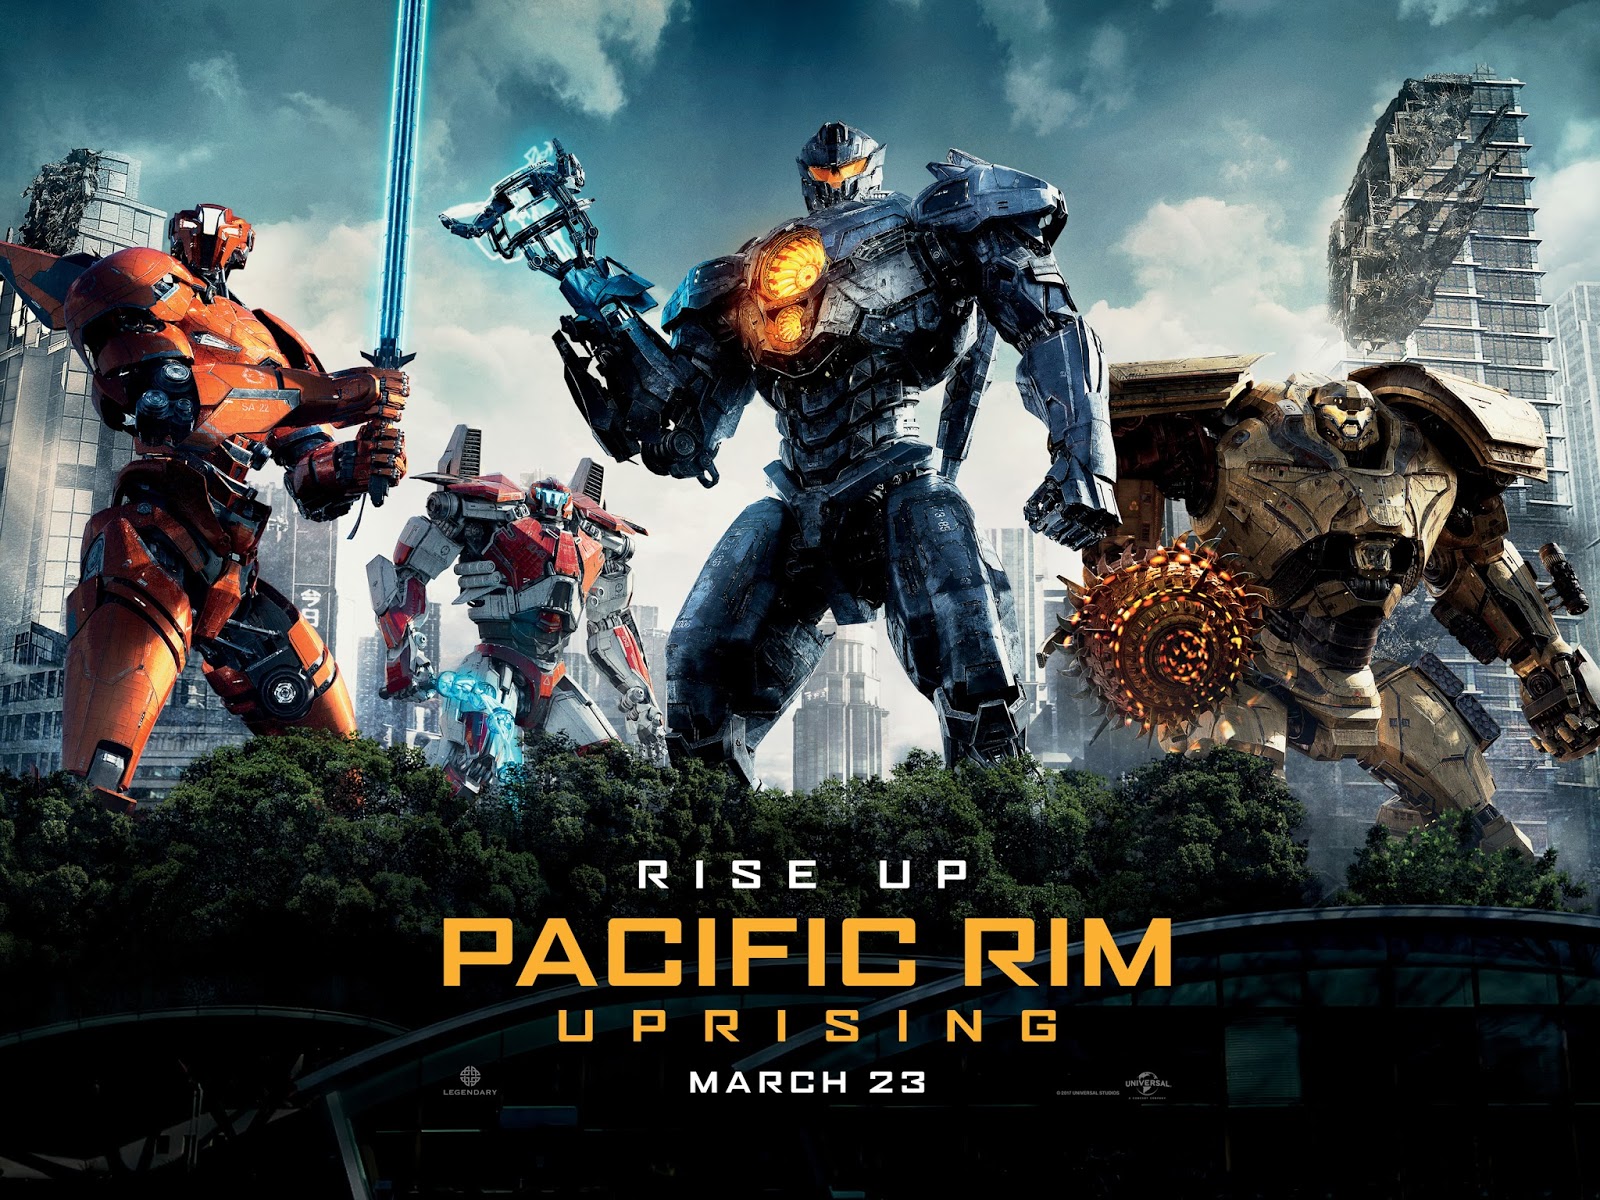 Pacific Rim: Uprising - movie review